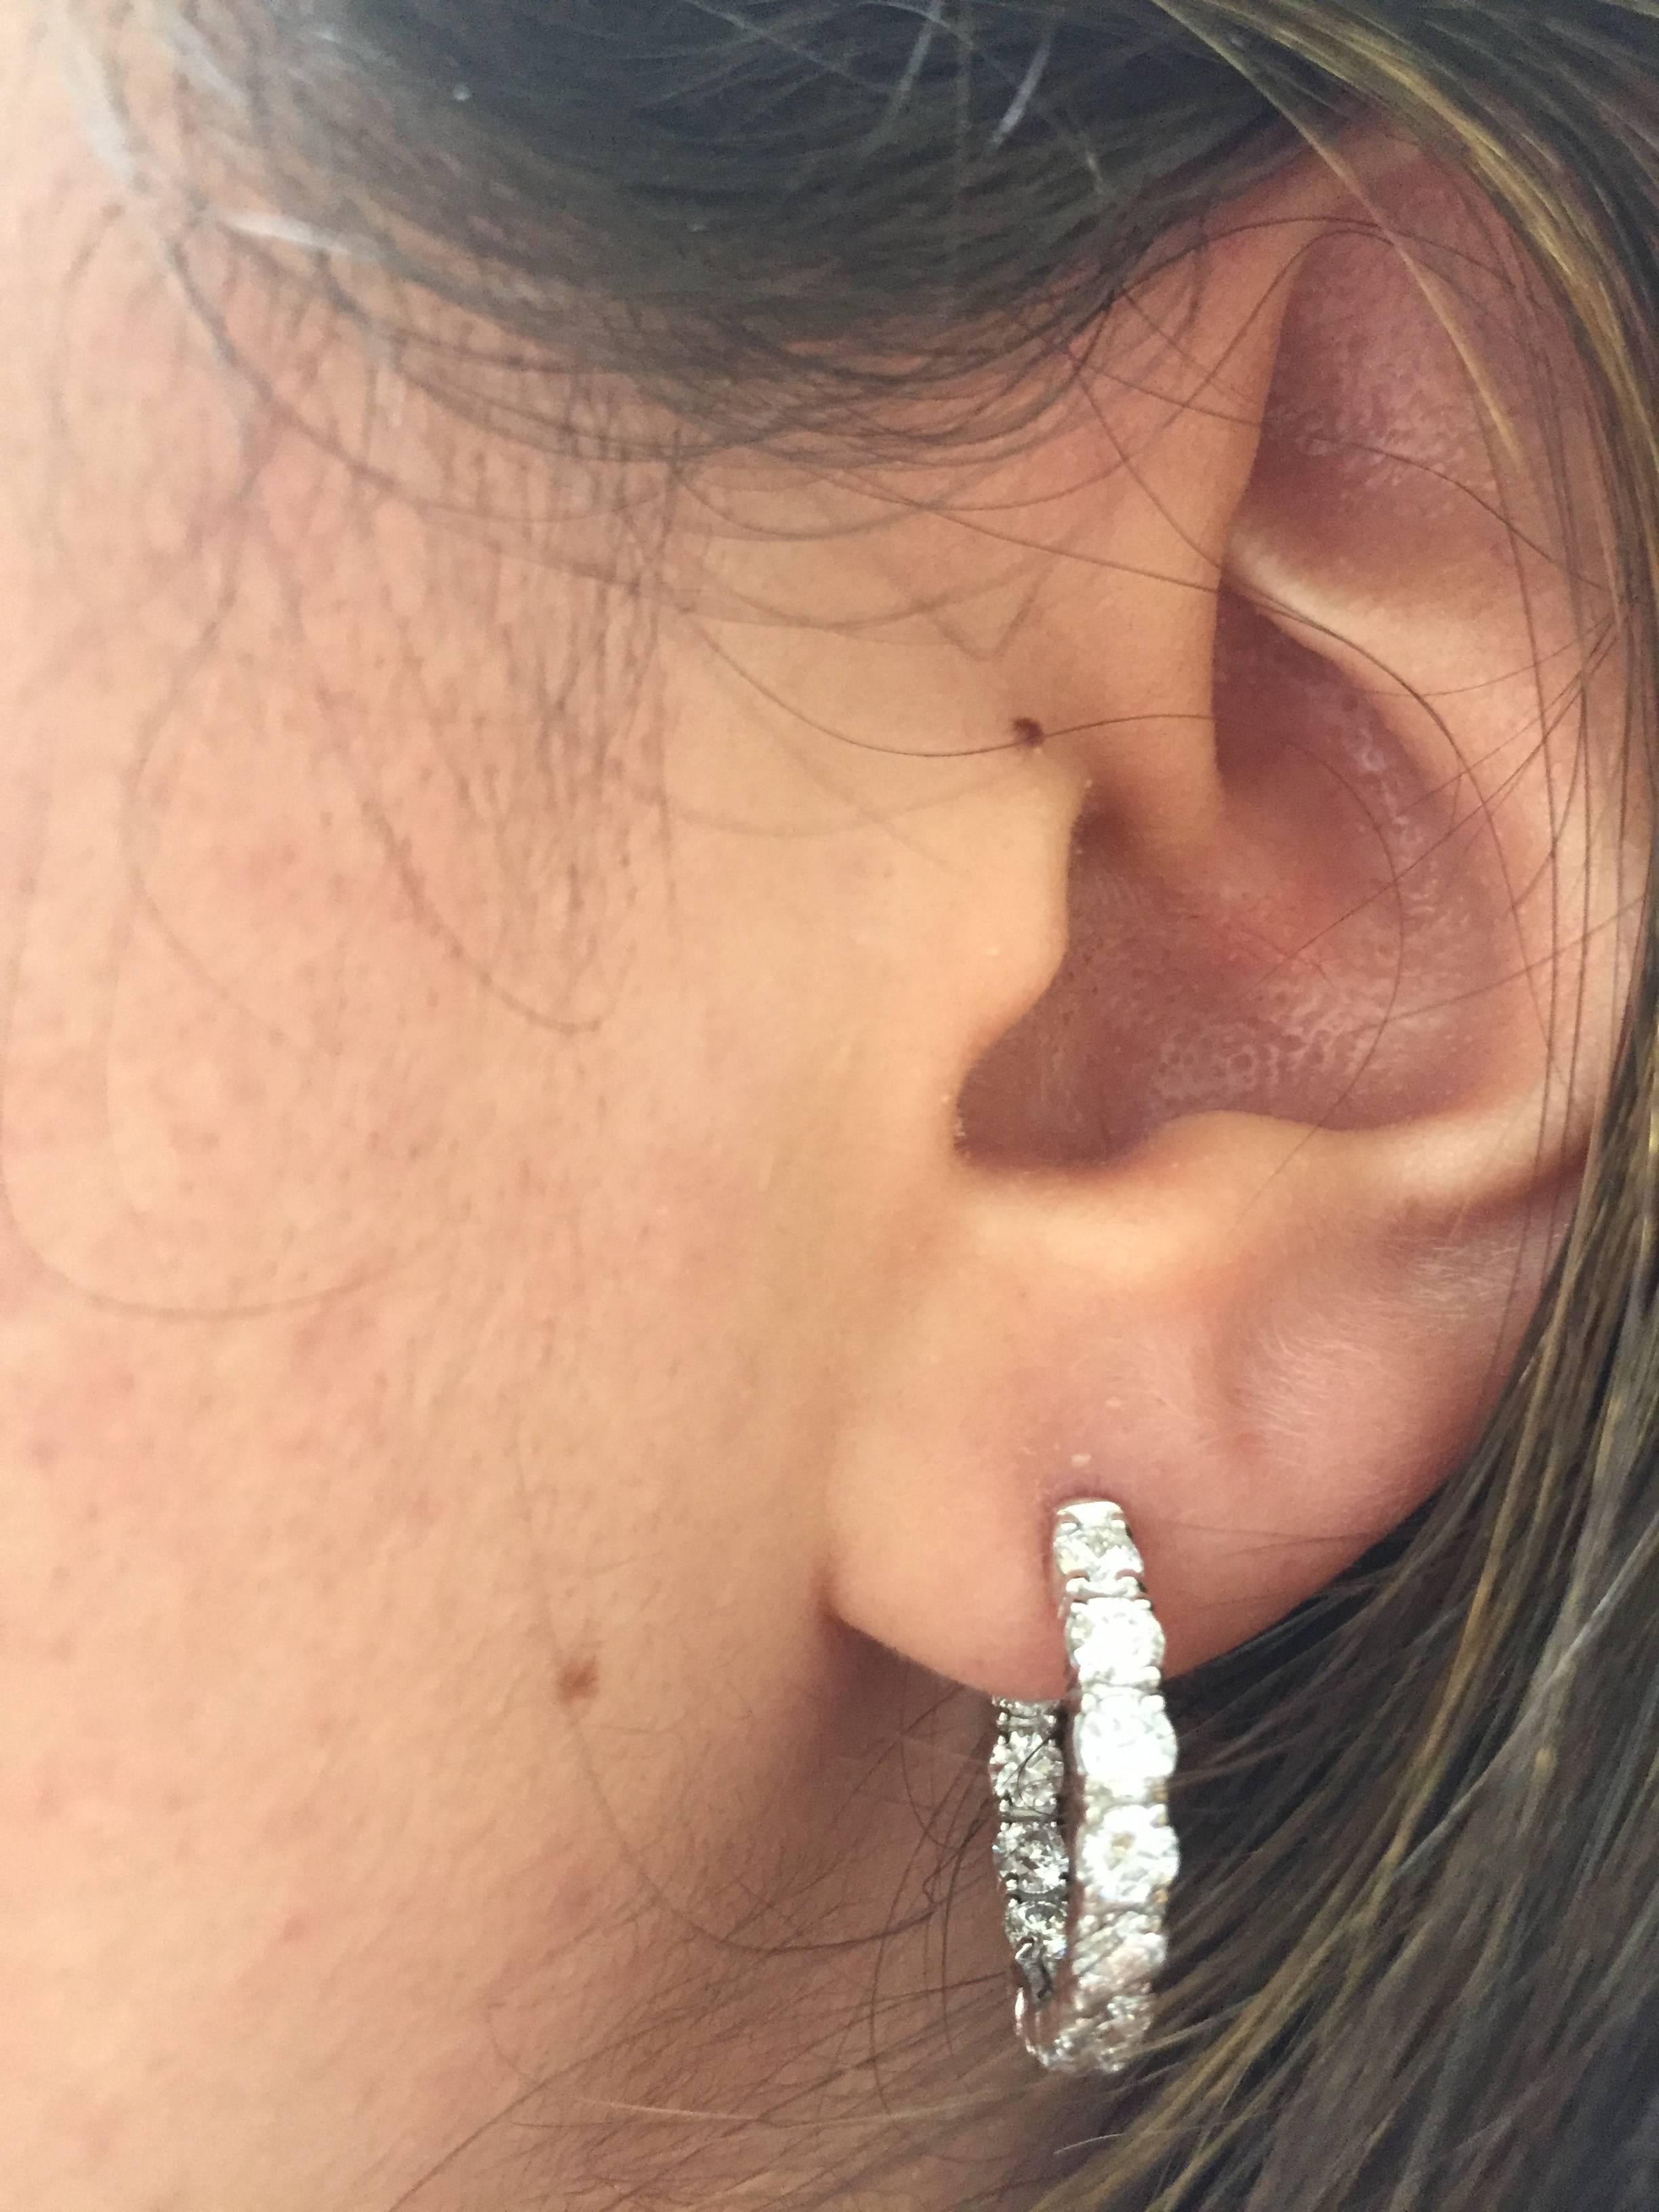 These hoops are 1 inch diameter, the stones are set outside as well as inside the earring. This is a very elegant and wearable diamond hoop. Each stone is 15 pts. The total weight is 3.12 carat.